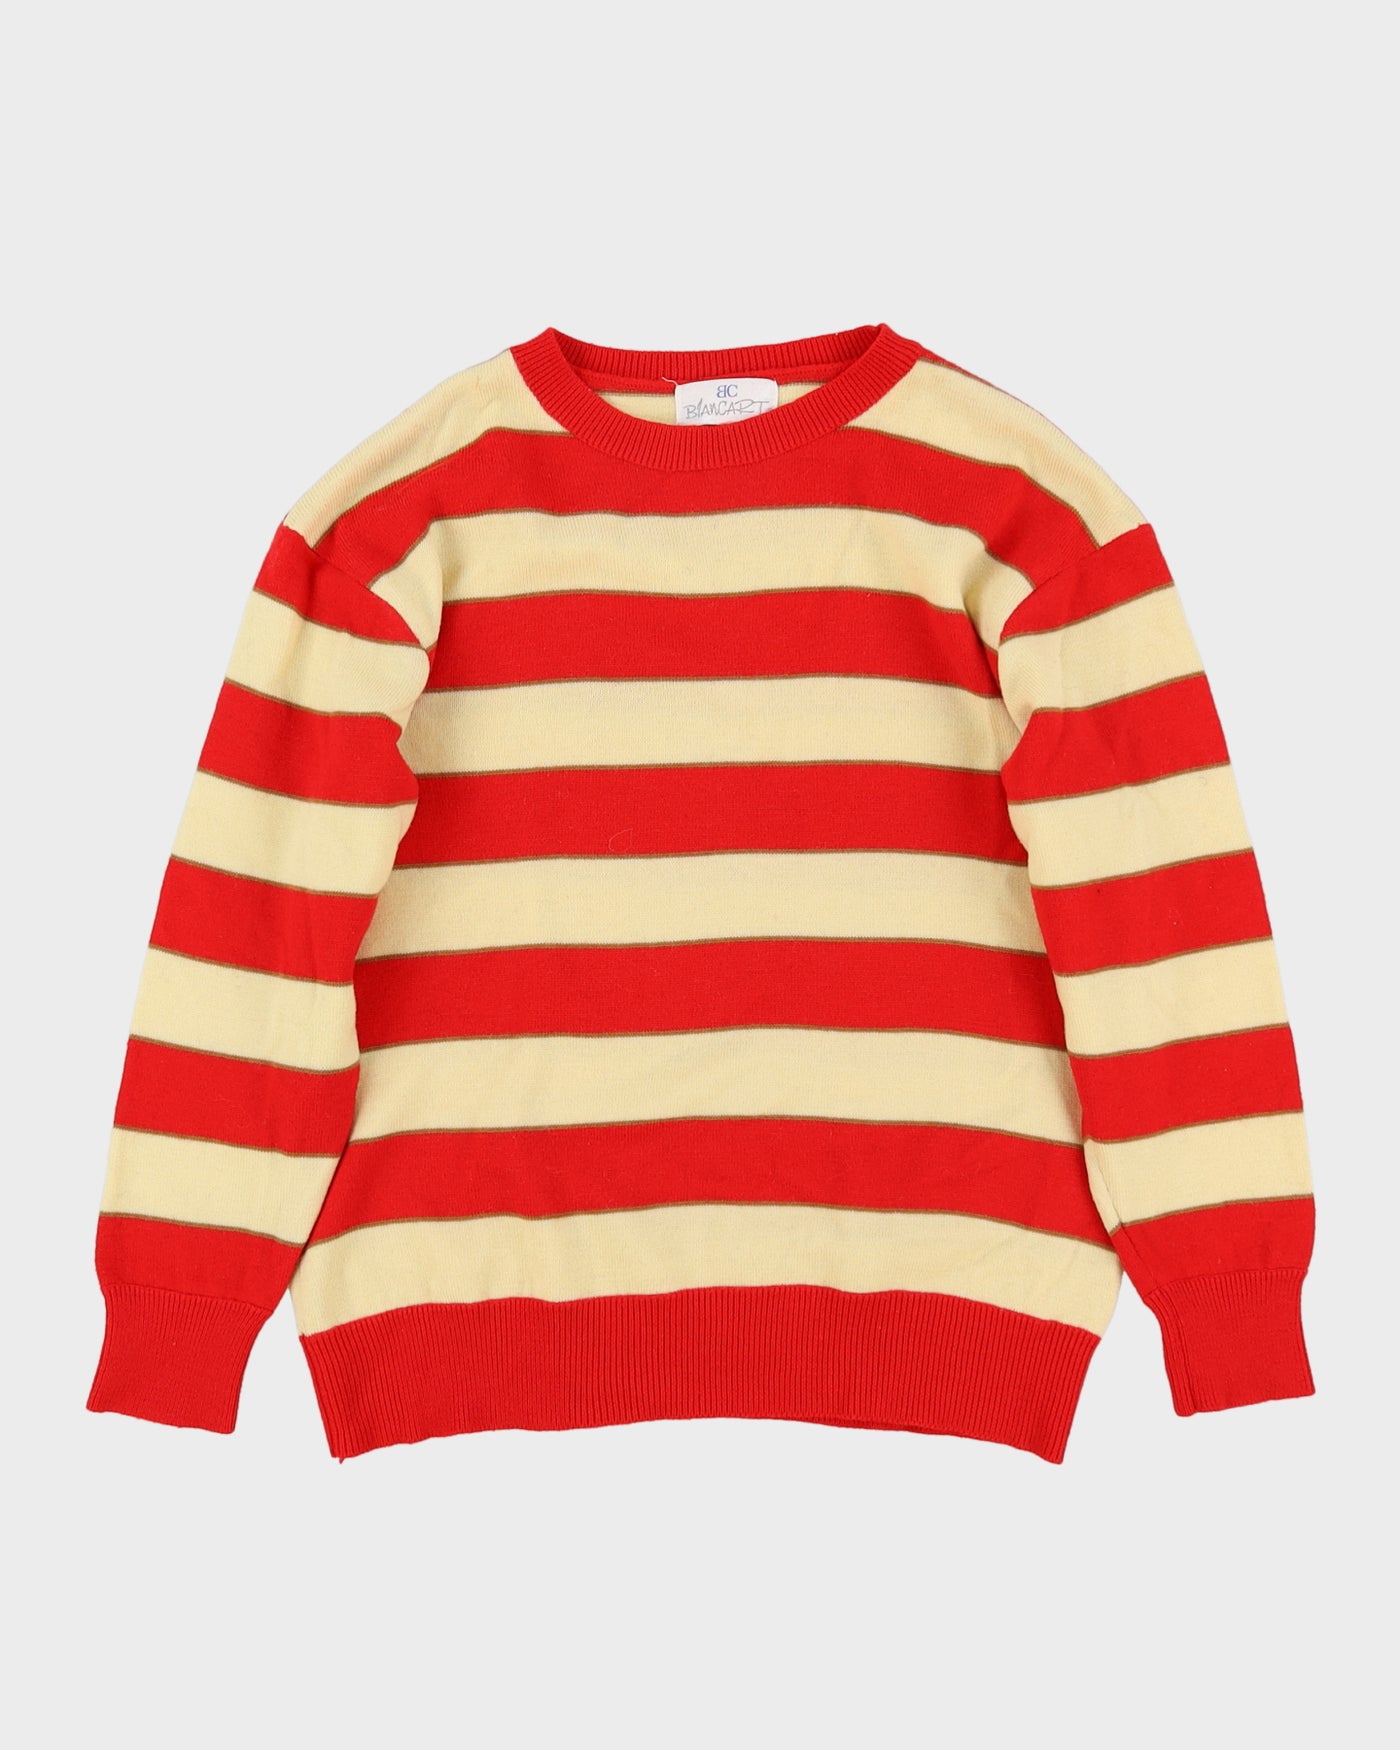 Red And Yellow Striped Knitted Jumper - S